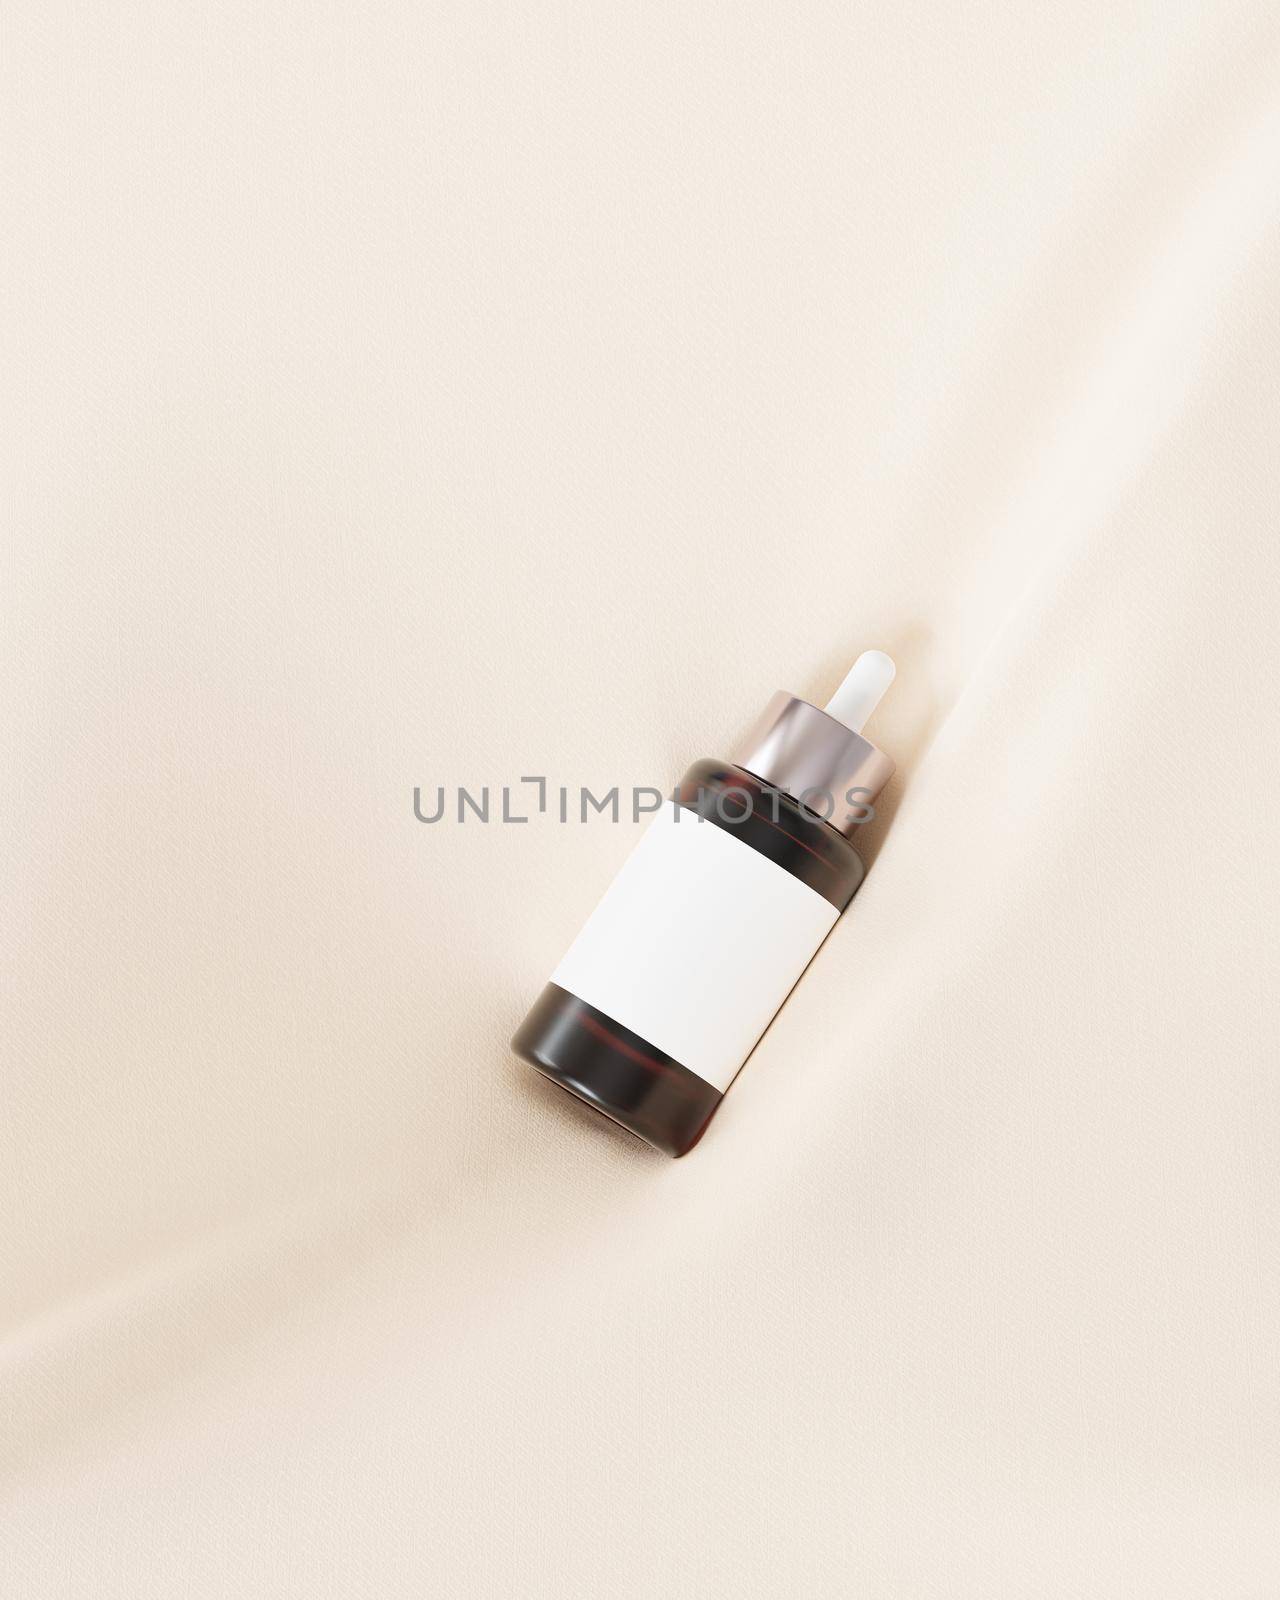 Mockup glass dropper bottle for cosmetics, care products or advertising, on beige linen cloth. 3d illustration render